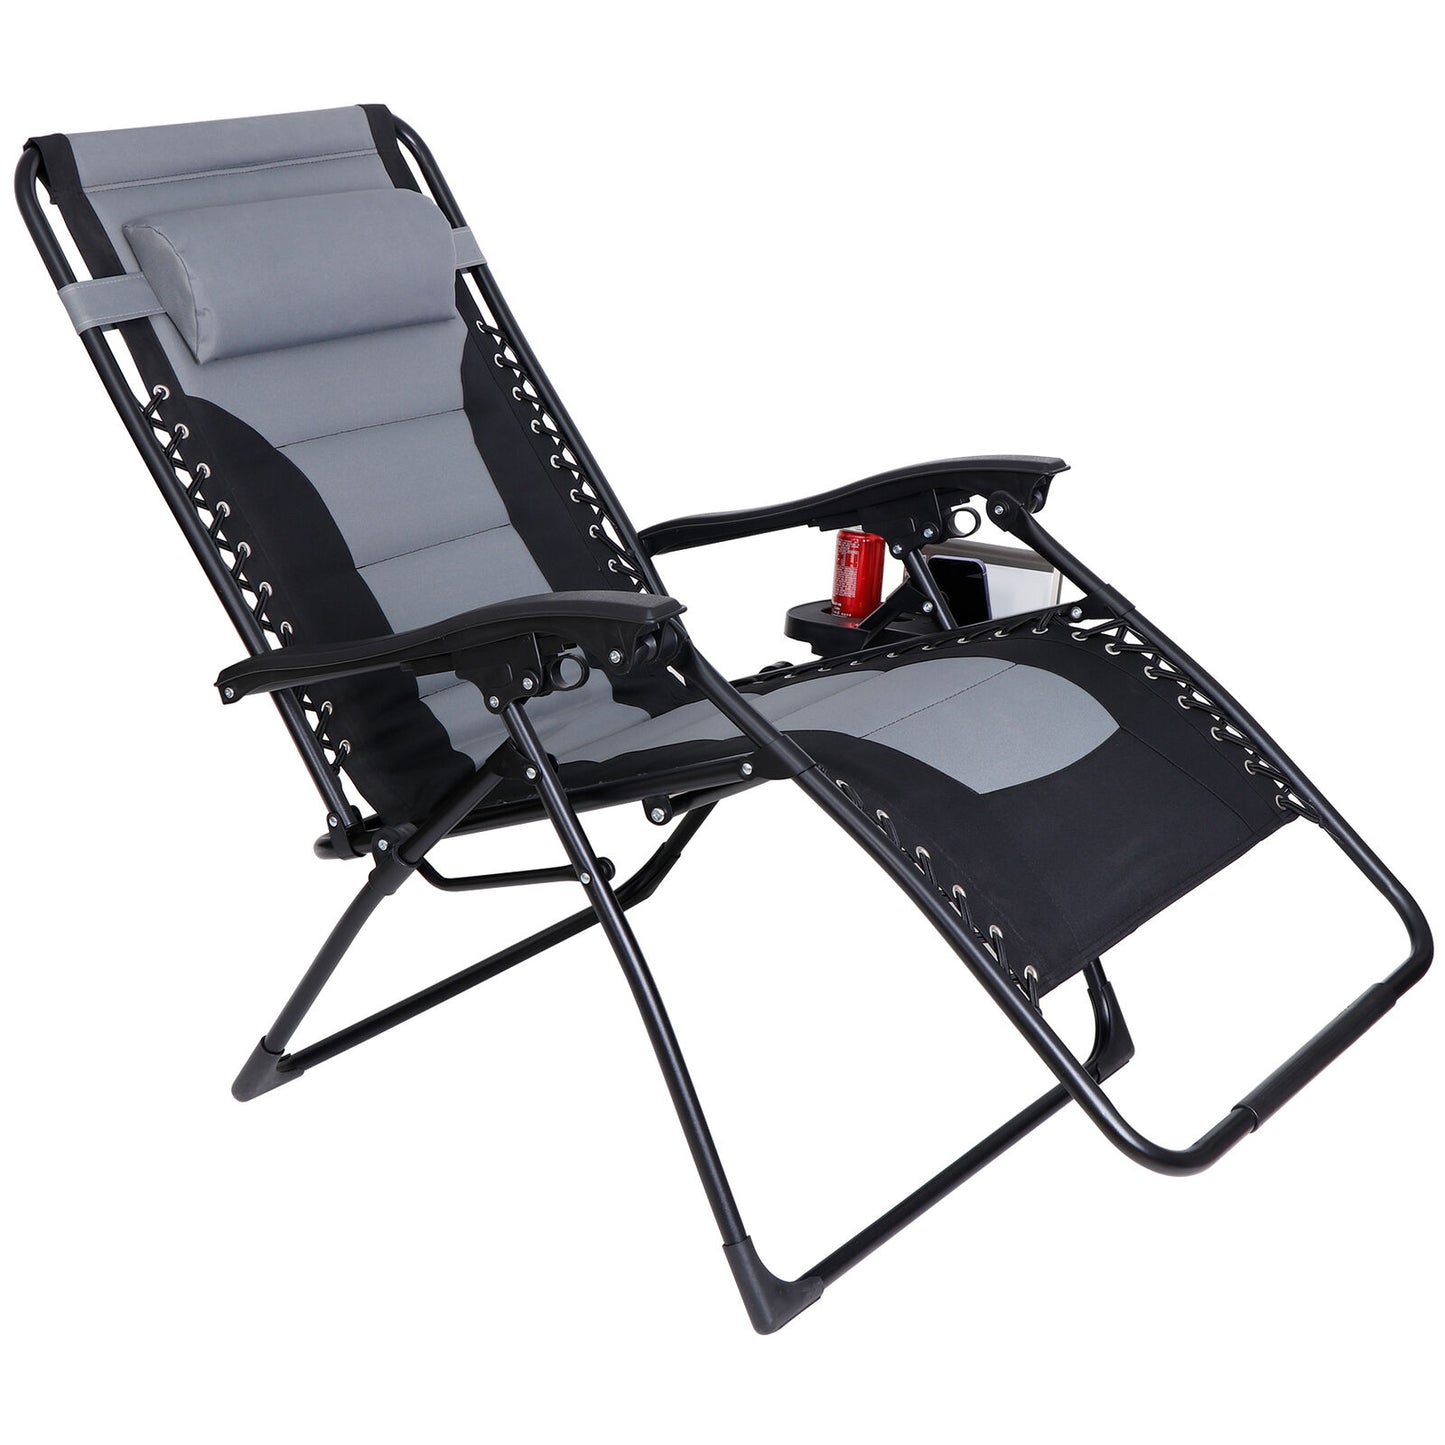 Set of 2 Zero Gravity Chair Oversized Folding Patio Padded Recliner Lounger Grey